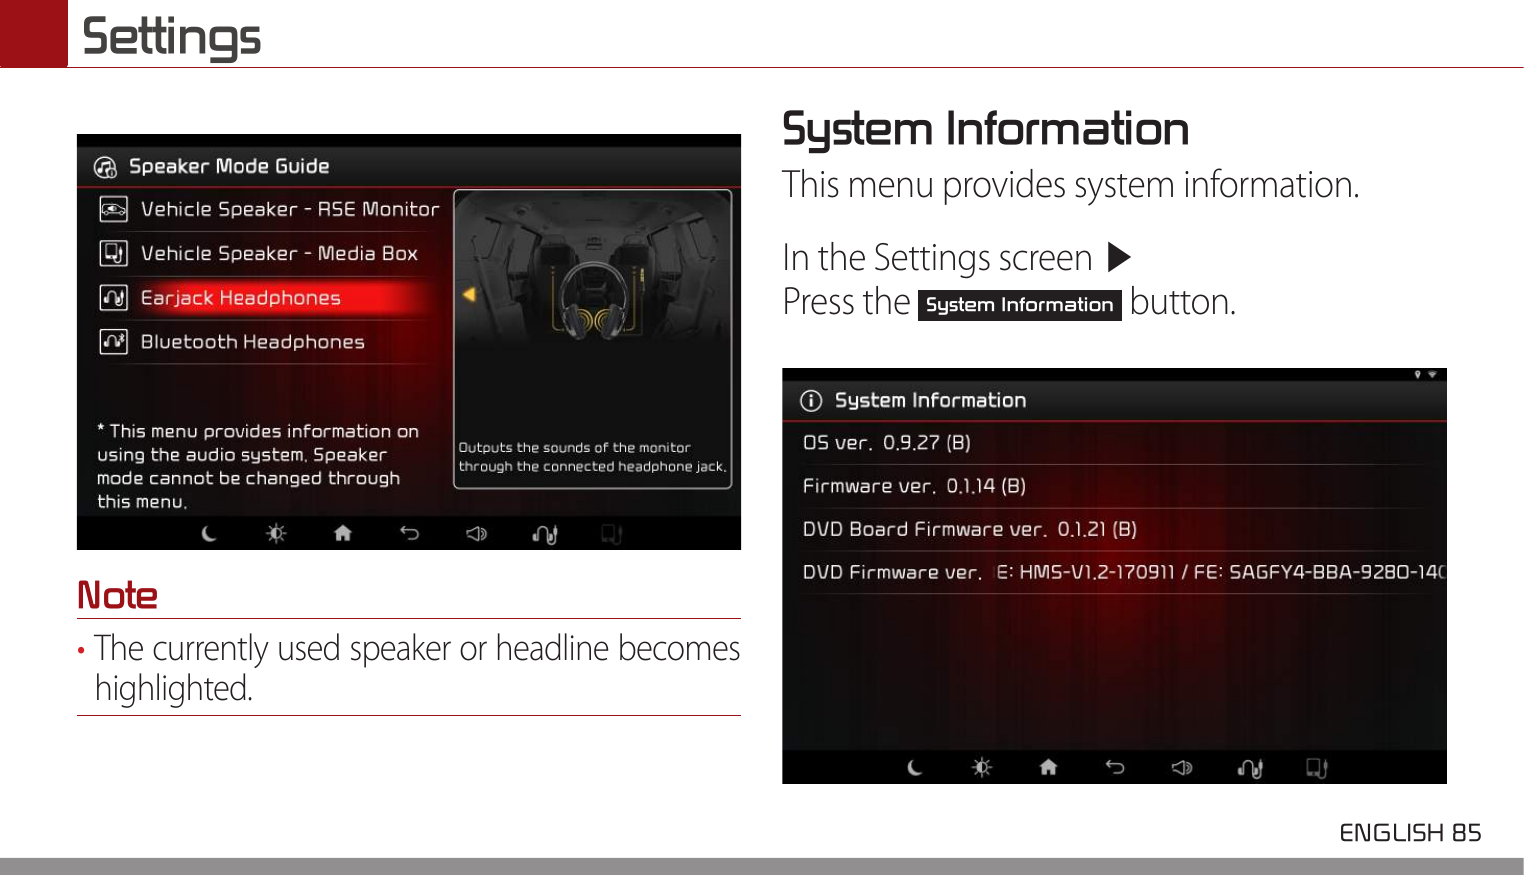  ENGLISH 85 SettingsNote• The currently used speaker or headline becomes highlighted. System InformationThis menu provides system information.In the Settings screen ▶ Press the System Information button.